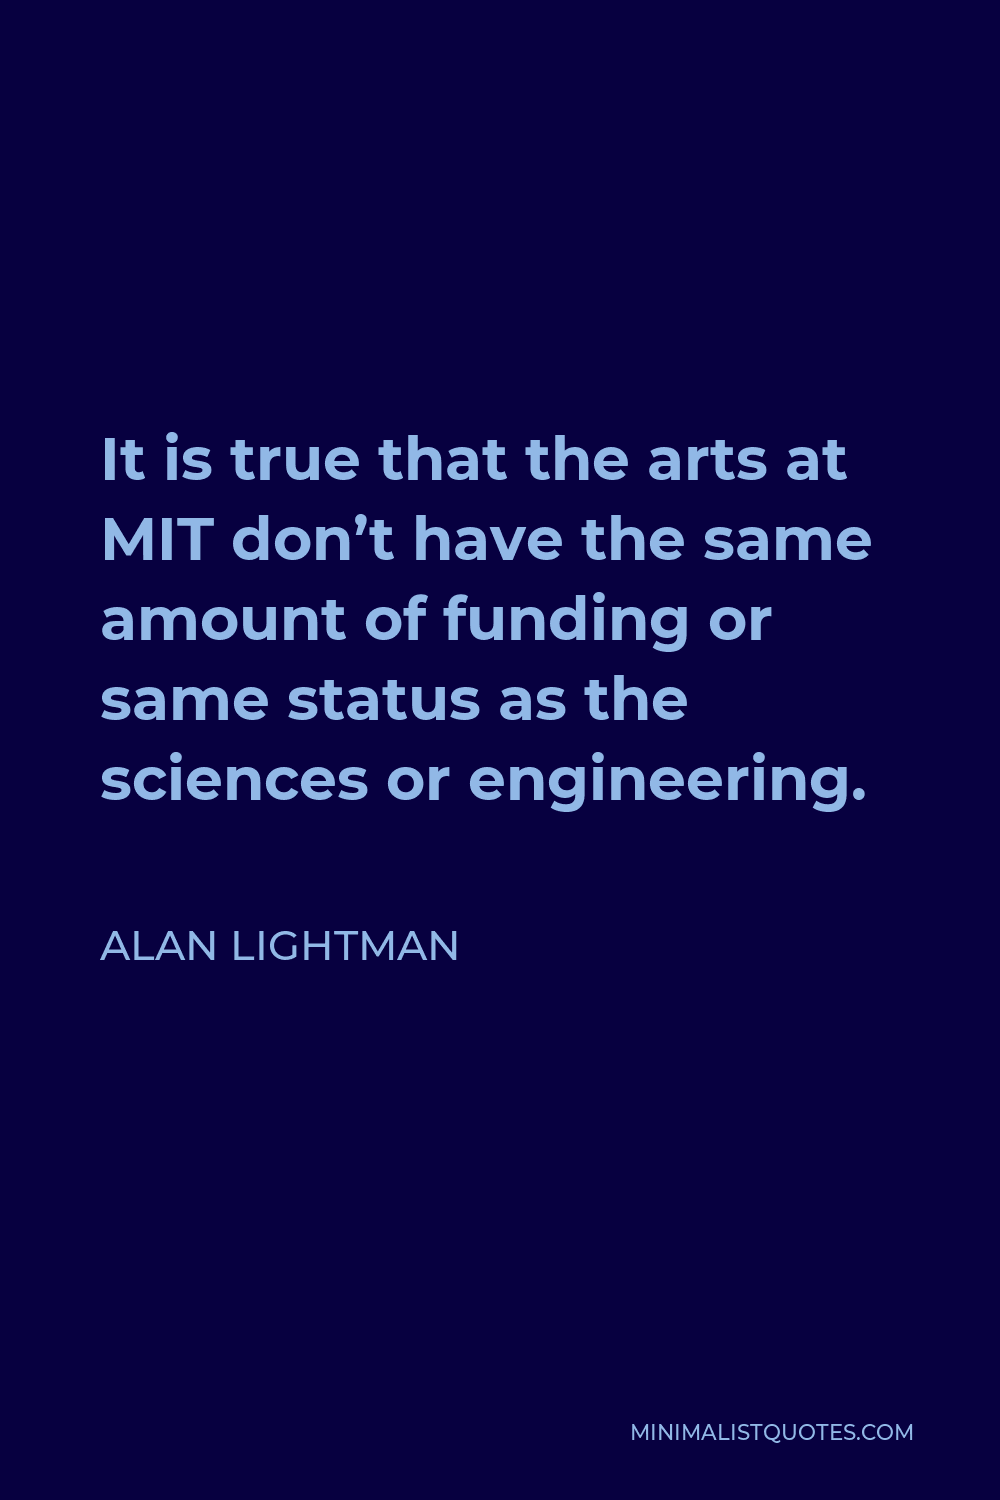 Alan Lightman Quote - It is true that the arts at MIT don’t have the same amount of funding or same status as the sciences or engineering.